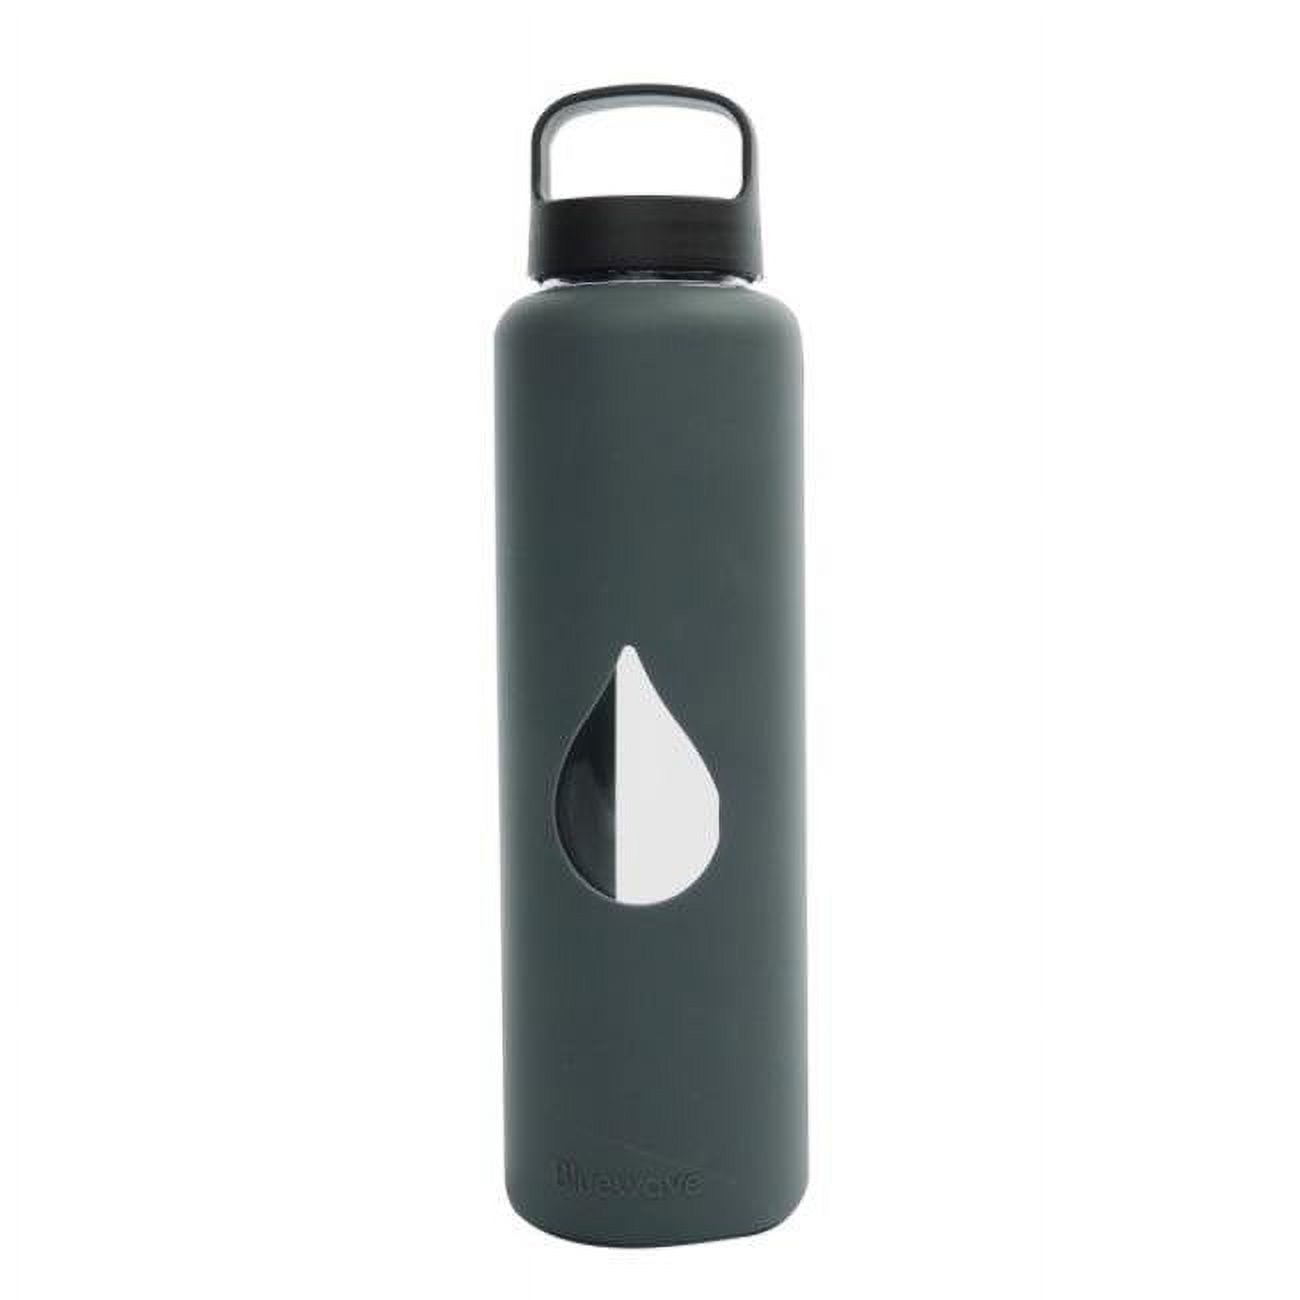 Picture of Bluewave Lifestyle GG150LC-Grey 750ml Reusable Glass Water Bottle With Loop Cap and Free Silicone Sleeve - Graphite